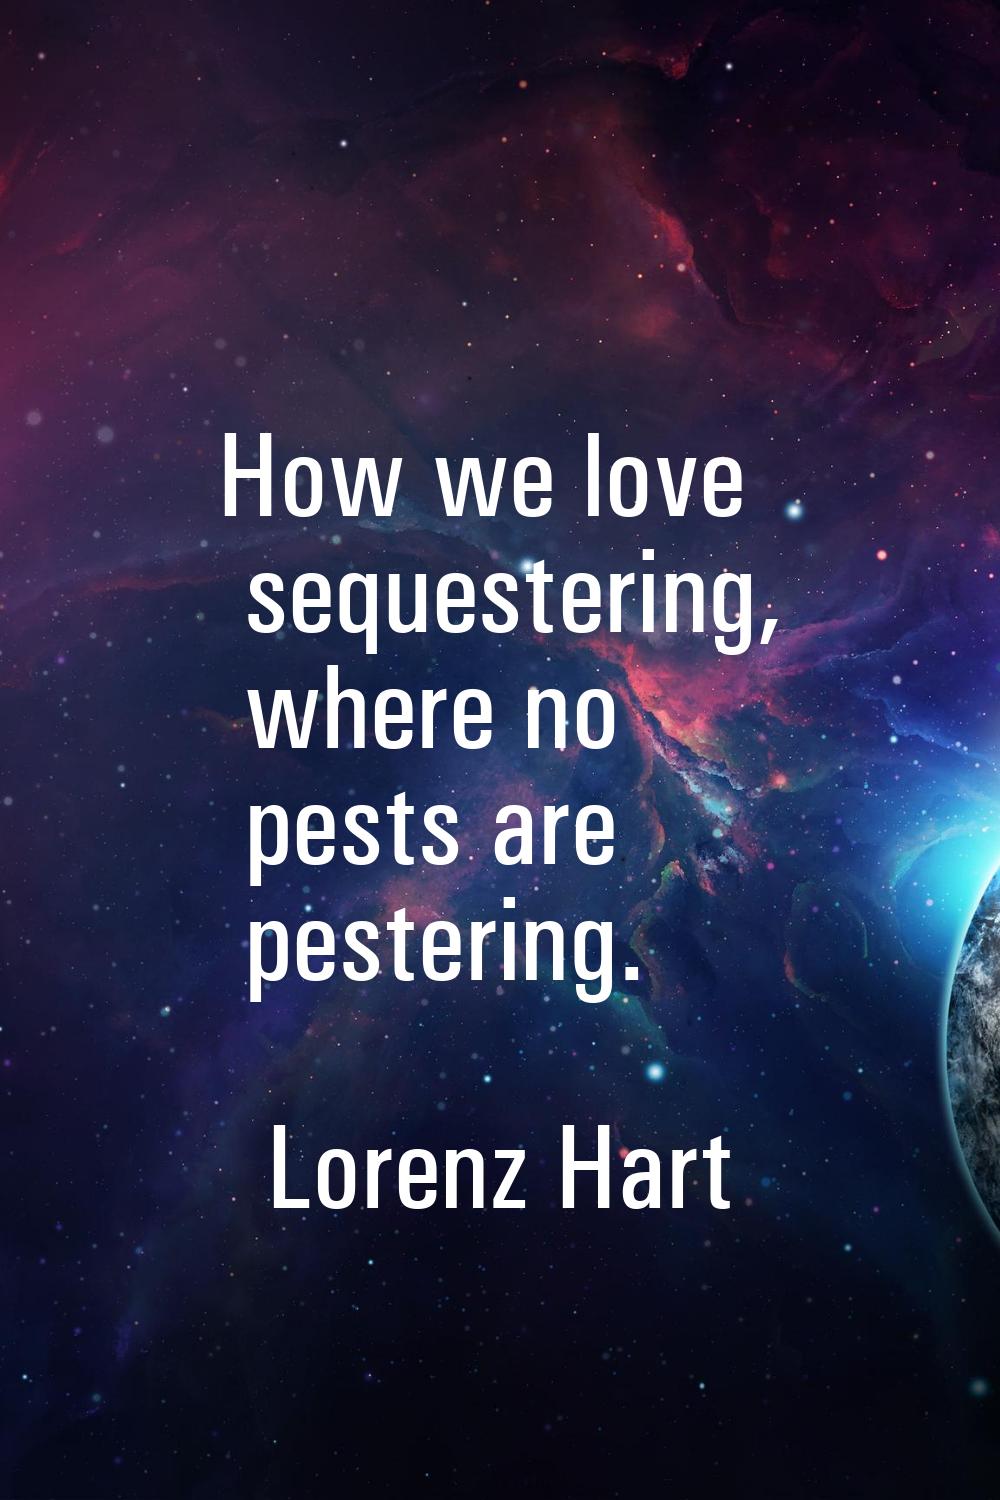 How we love sequestering, where no pests are pestering.